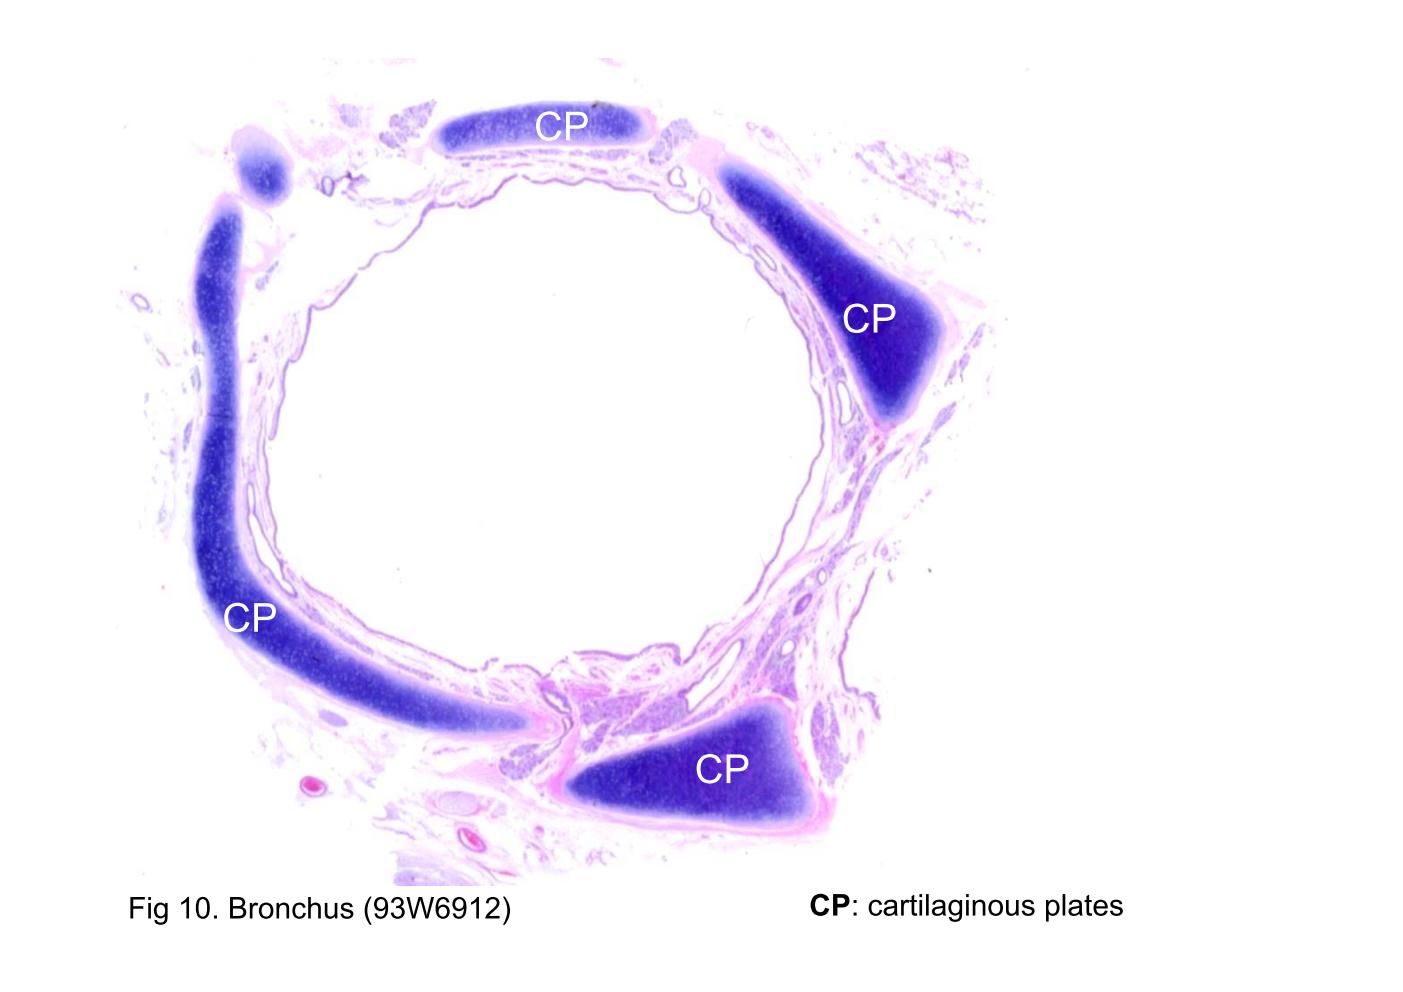 block9_22.jpg - Fig 10. Bronchus (93W6912)Within the bronchus, the cartilaginous plates (CP) are arranged into flattened, interconnected plates (sometimes overlapping) rather than discrete C-shaped cartilages as in the trachea.